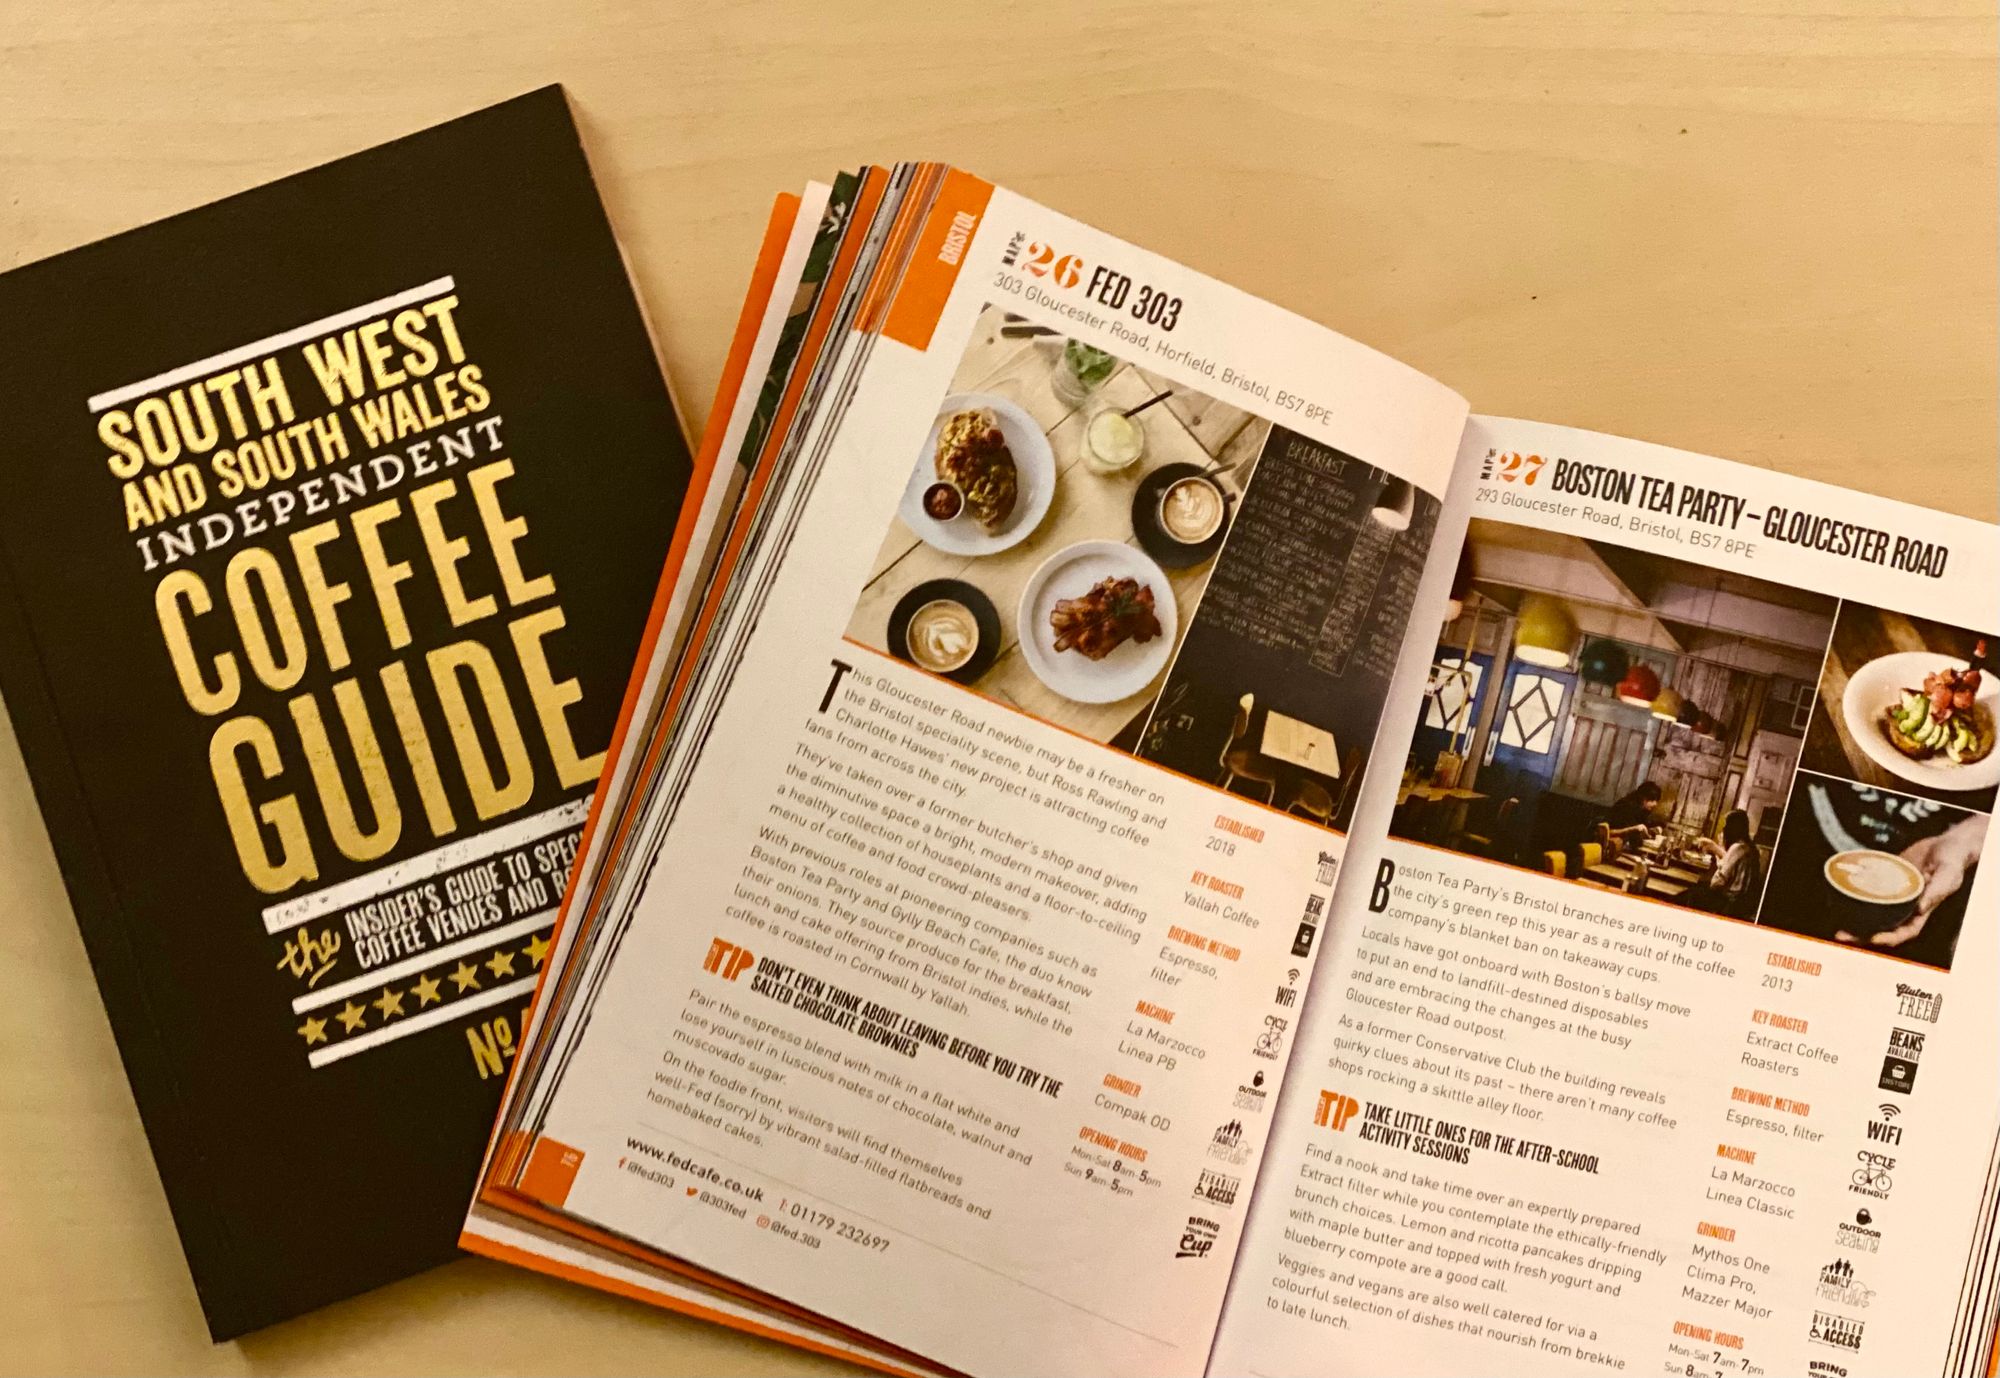 Two copies of the South West and South Wales Independent Coffee Guide, one open and showing a couple of coffee shops